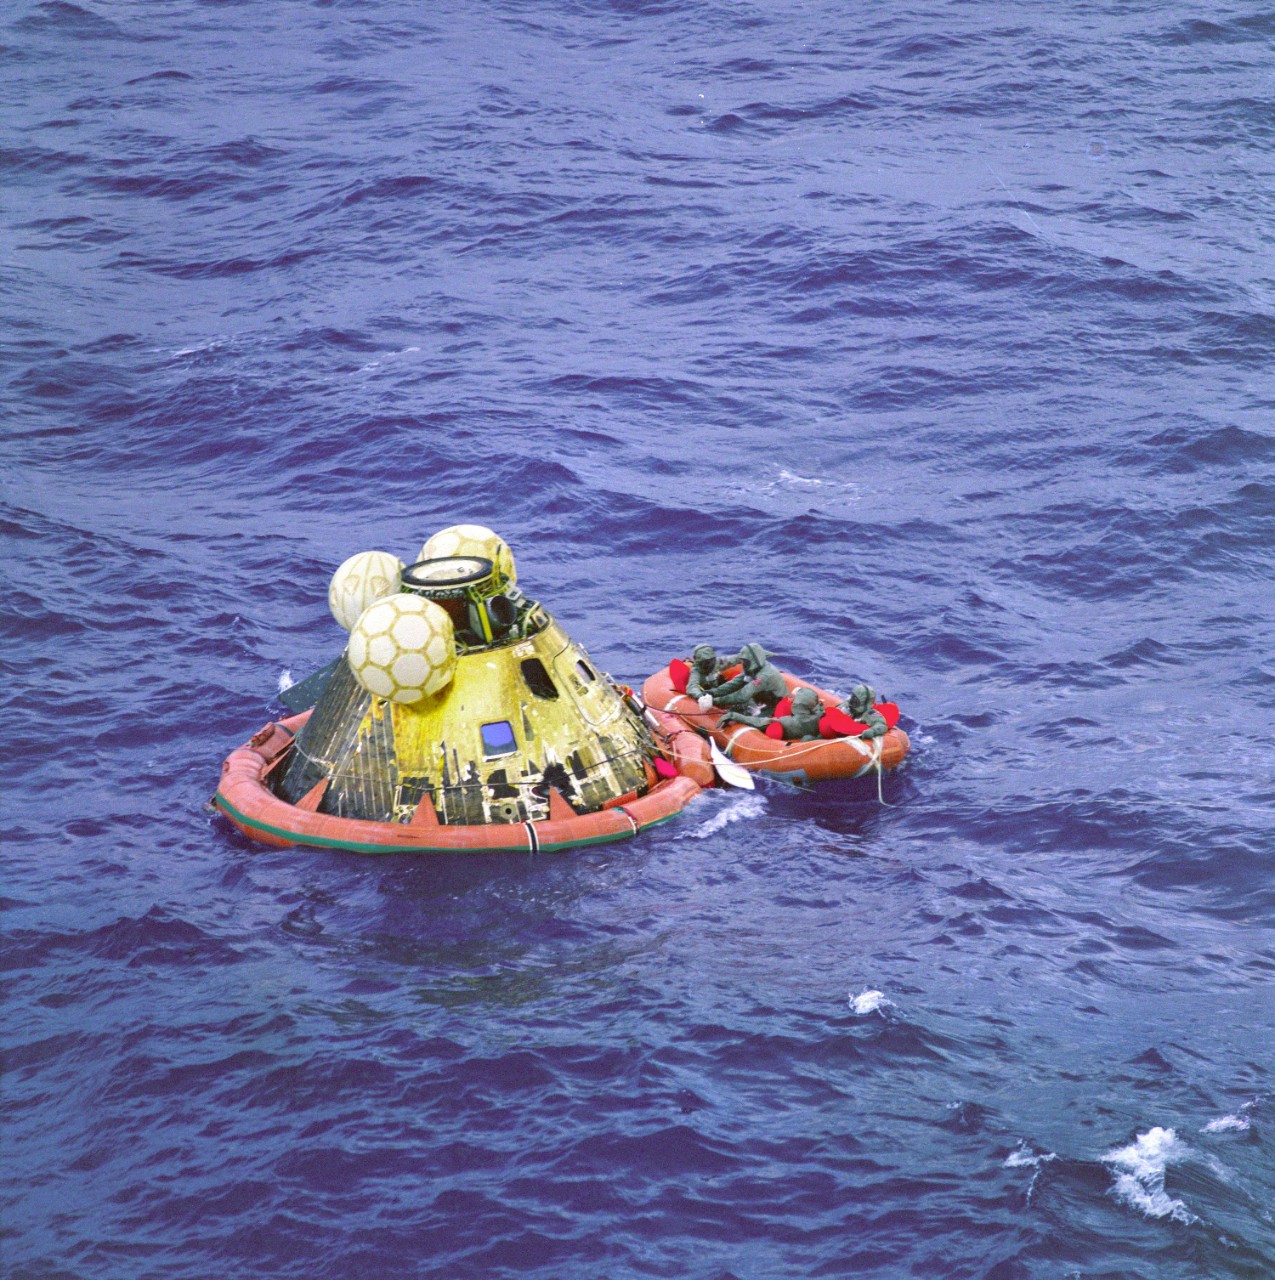 Recovery of Apollo 11 astronauts and capsule after splashdown Photo Print